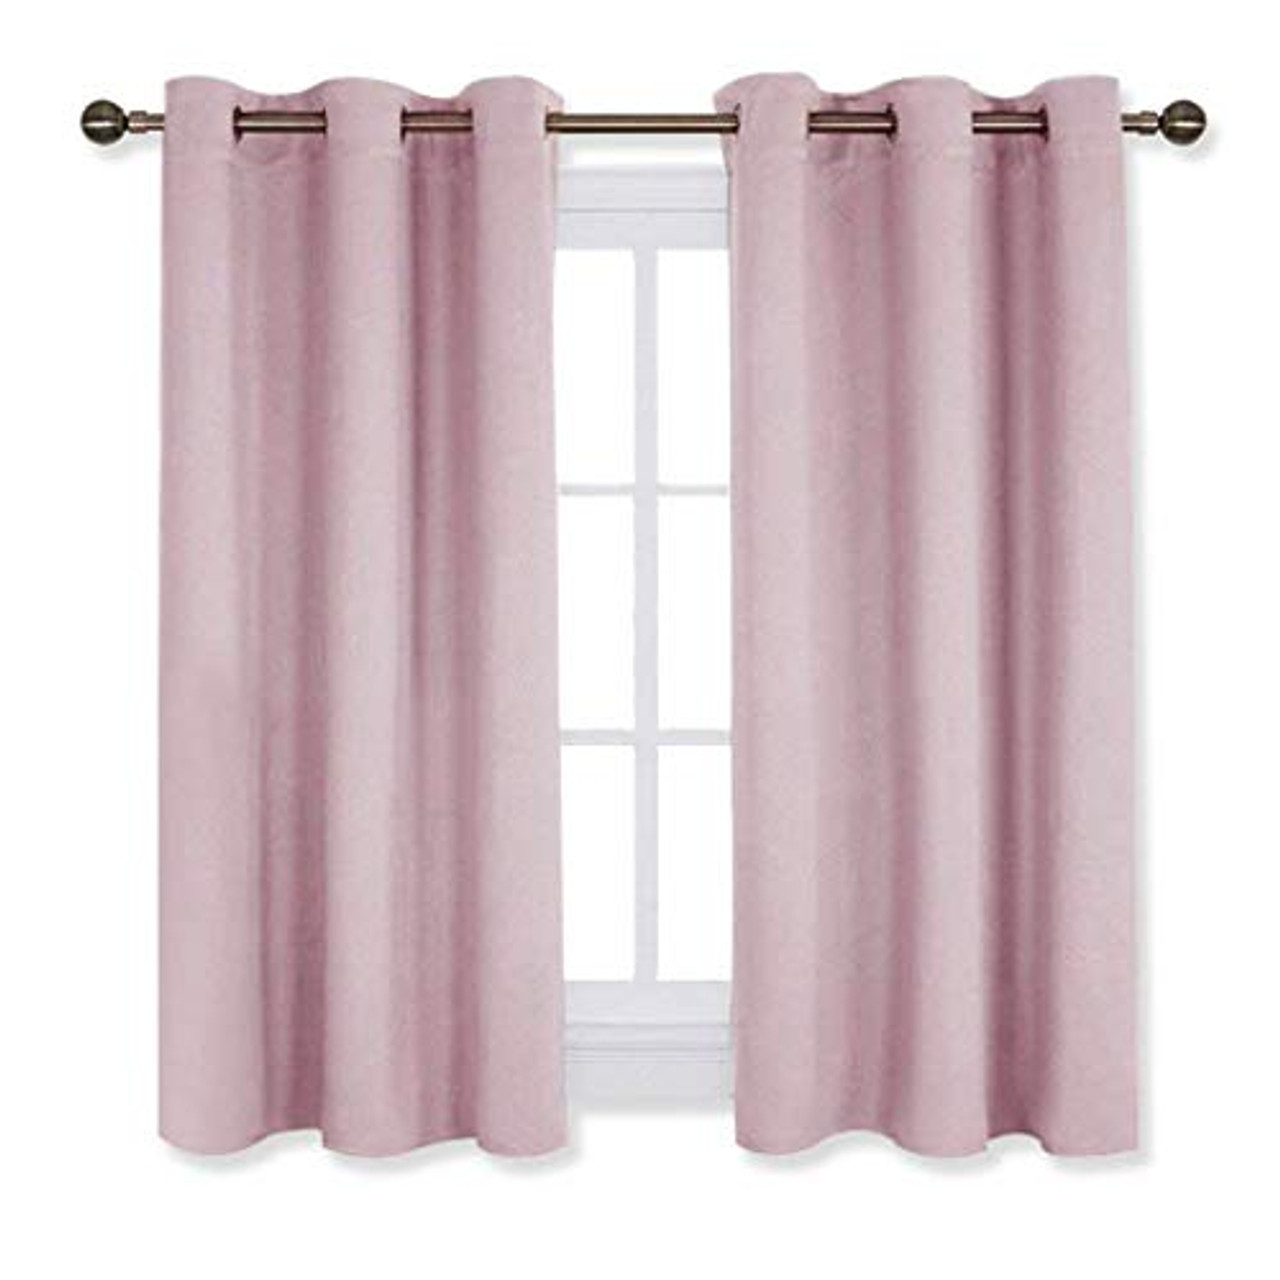 NICETOWN Blackout Curtain Panels for Girls Room, Baby Pink=Lavender Pink 